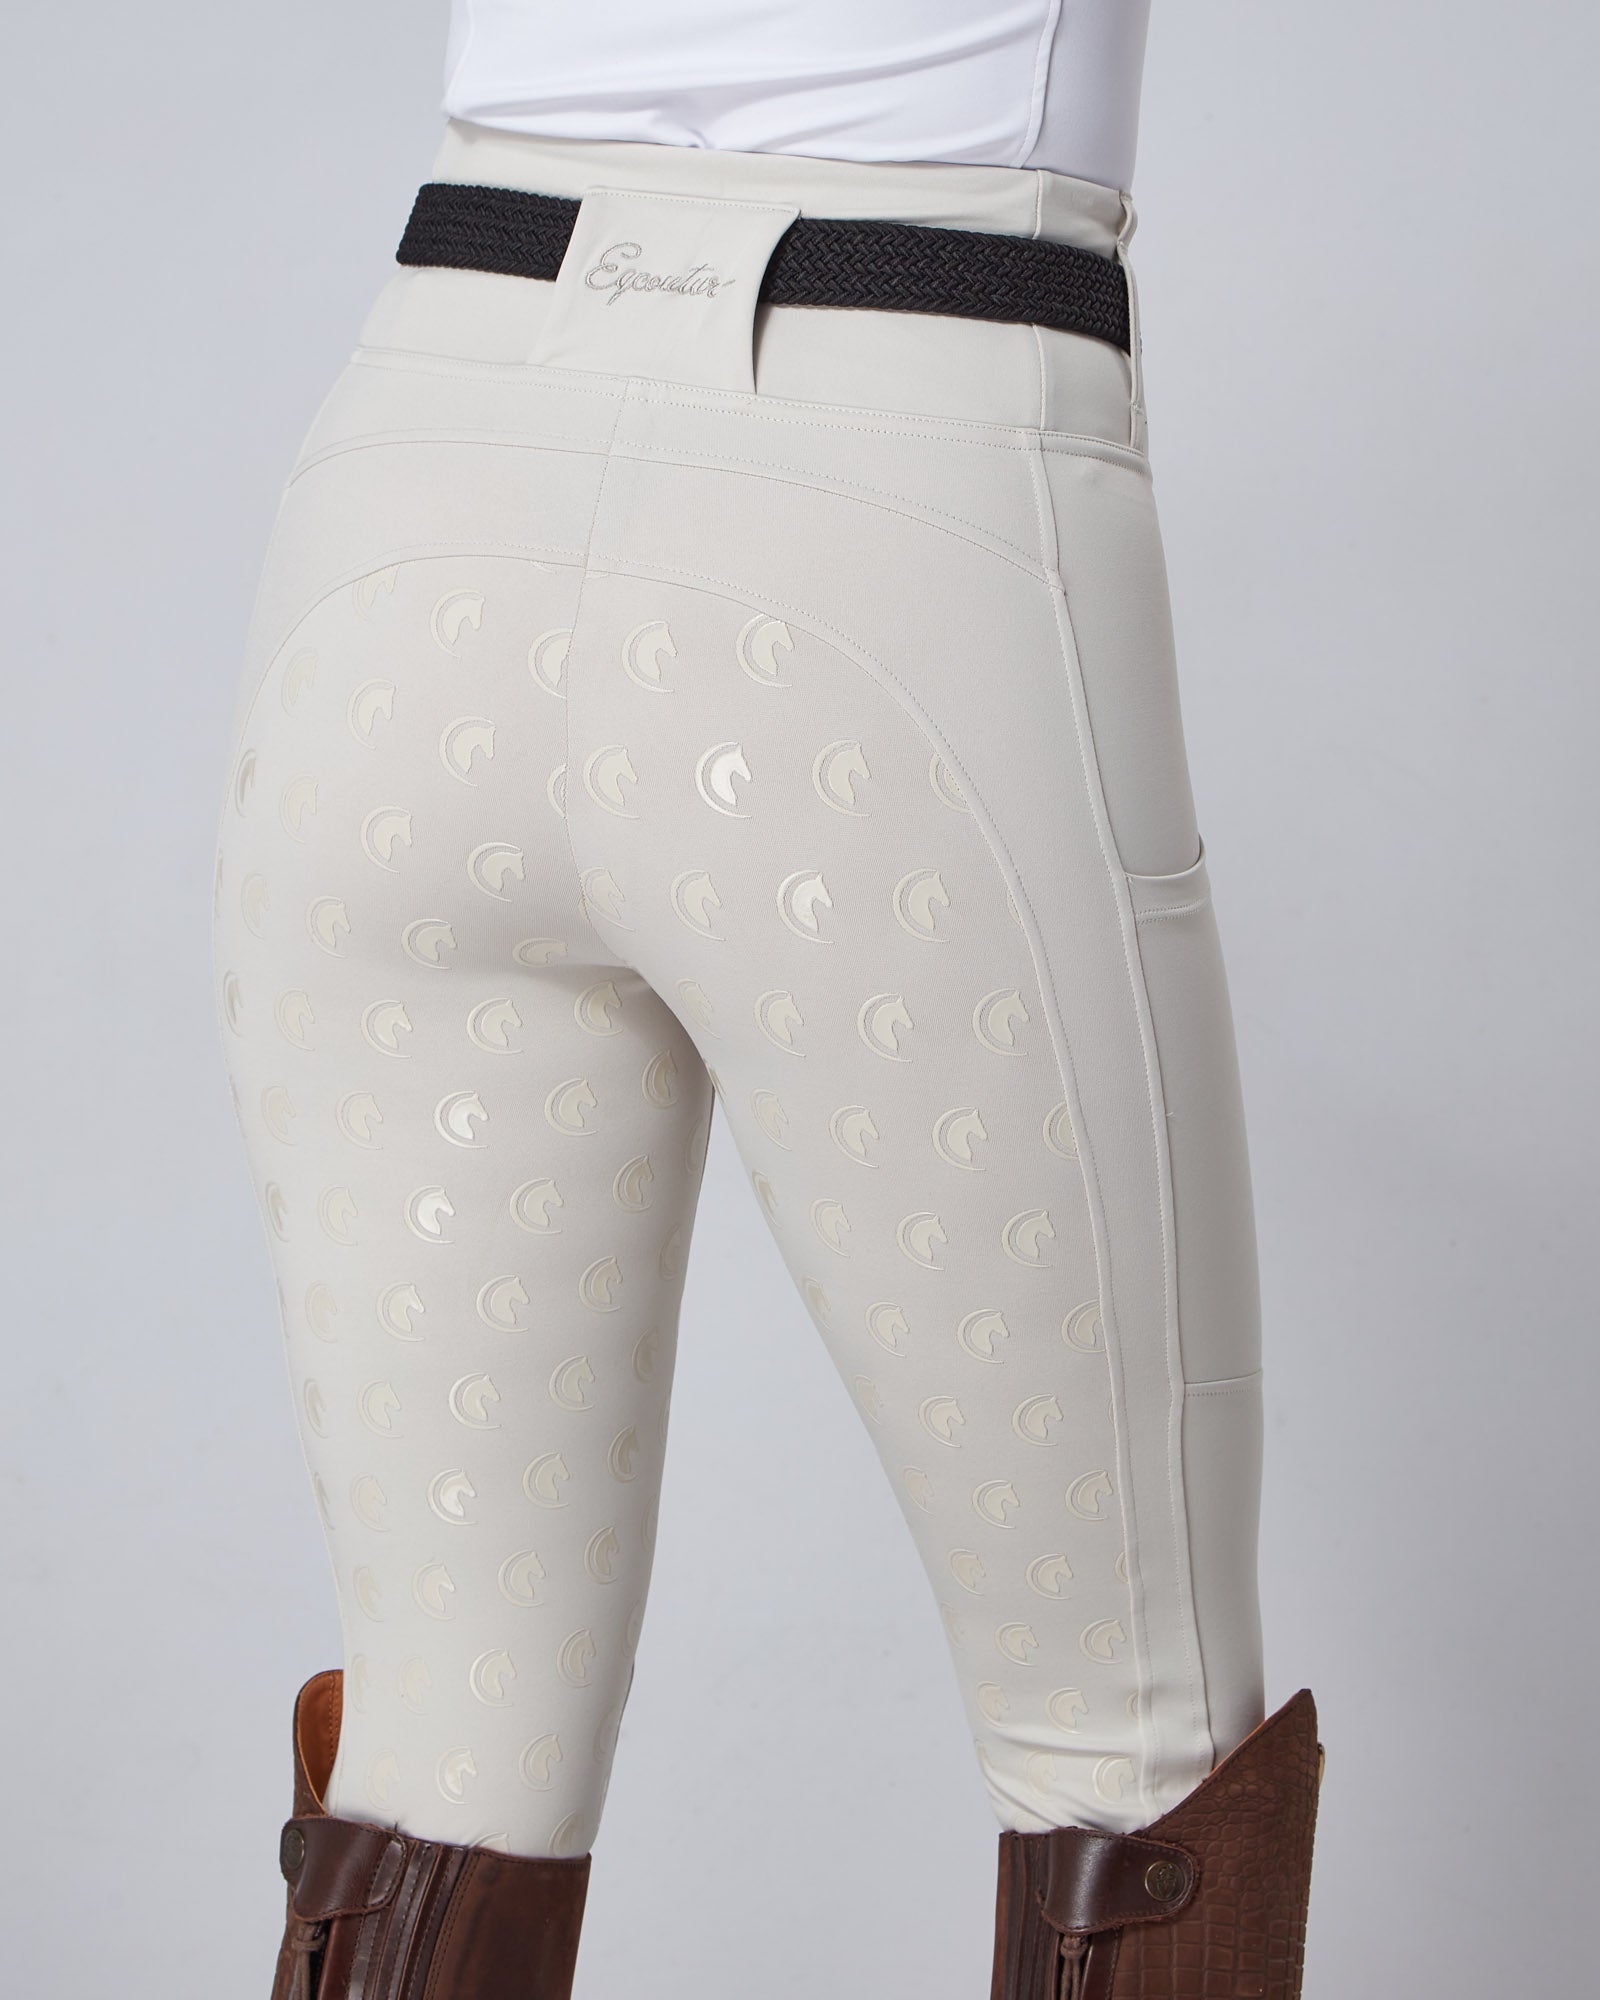 Horse Riding Competition Leggings / Tights / Breeches - STONE